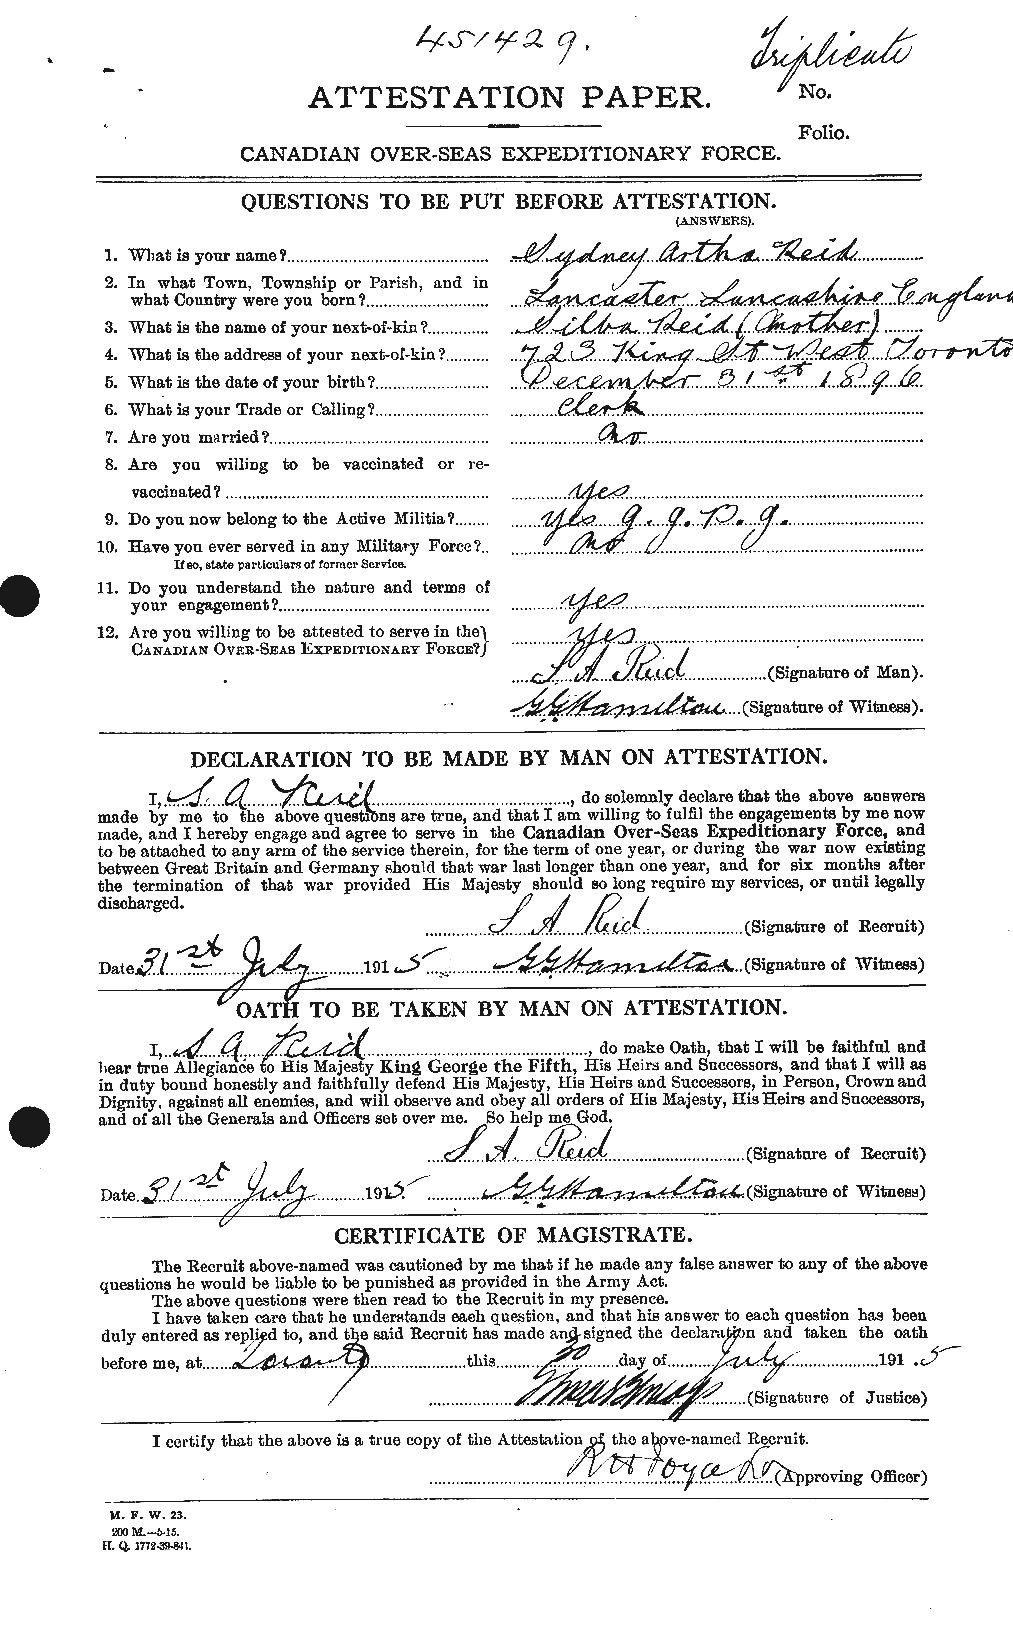 Personnel Records of the First World War - CEF 601975a